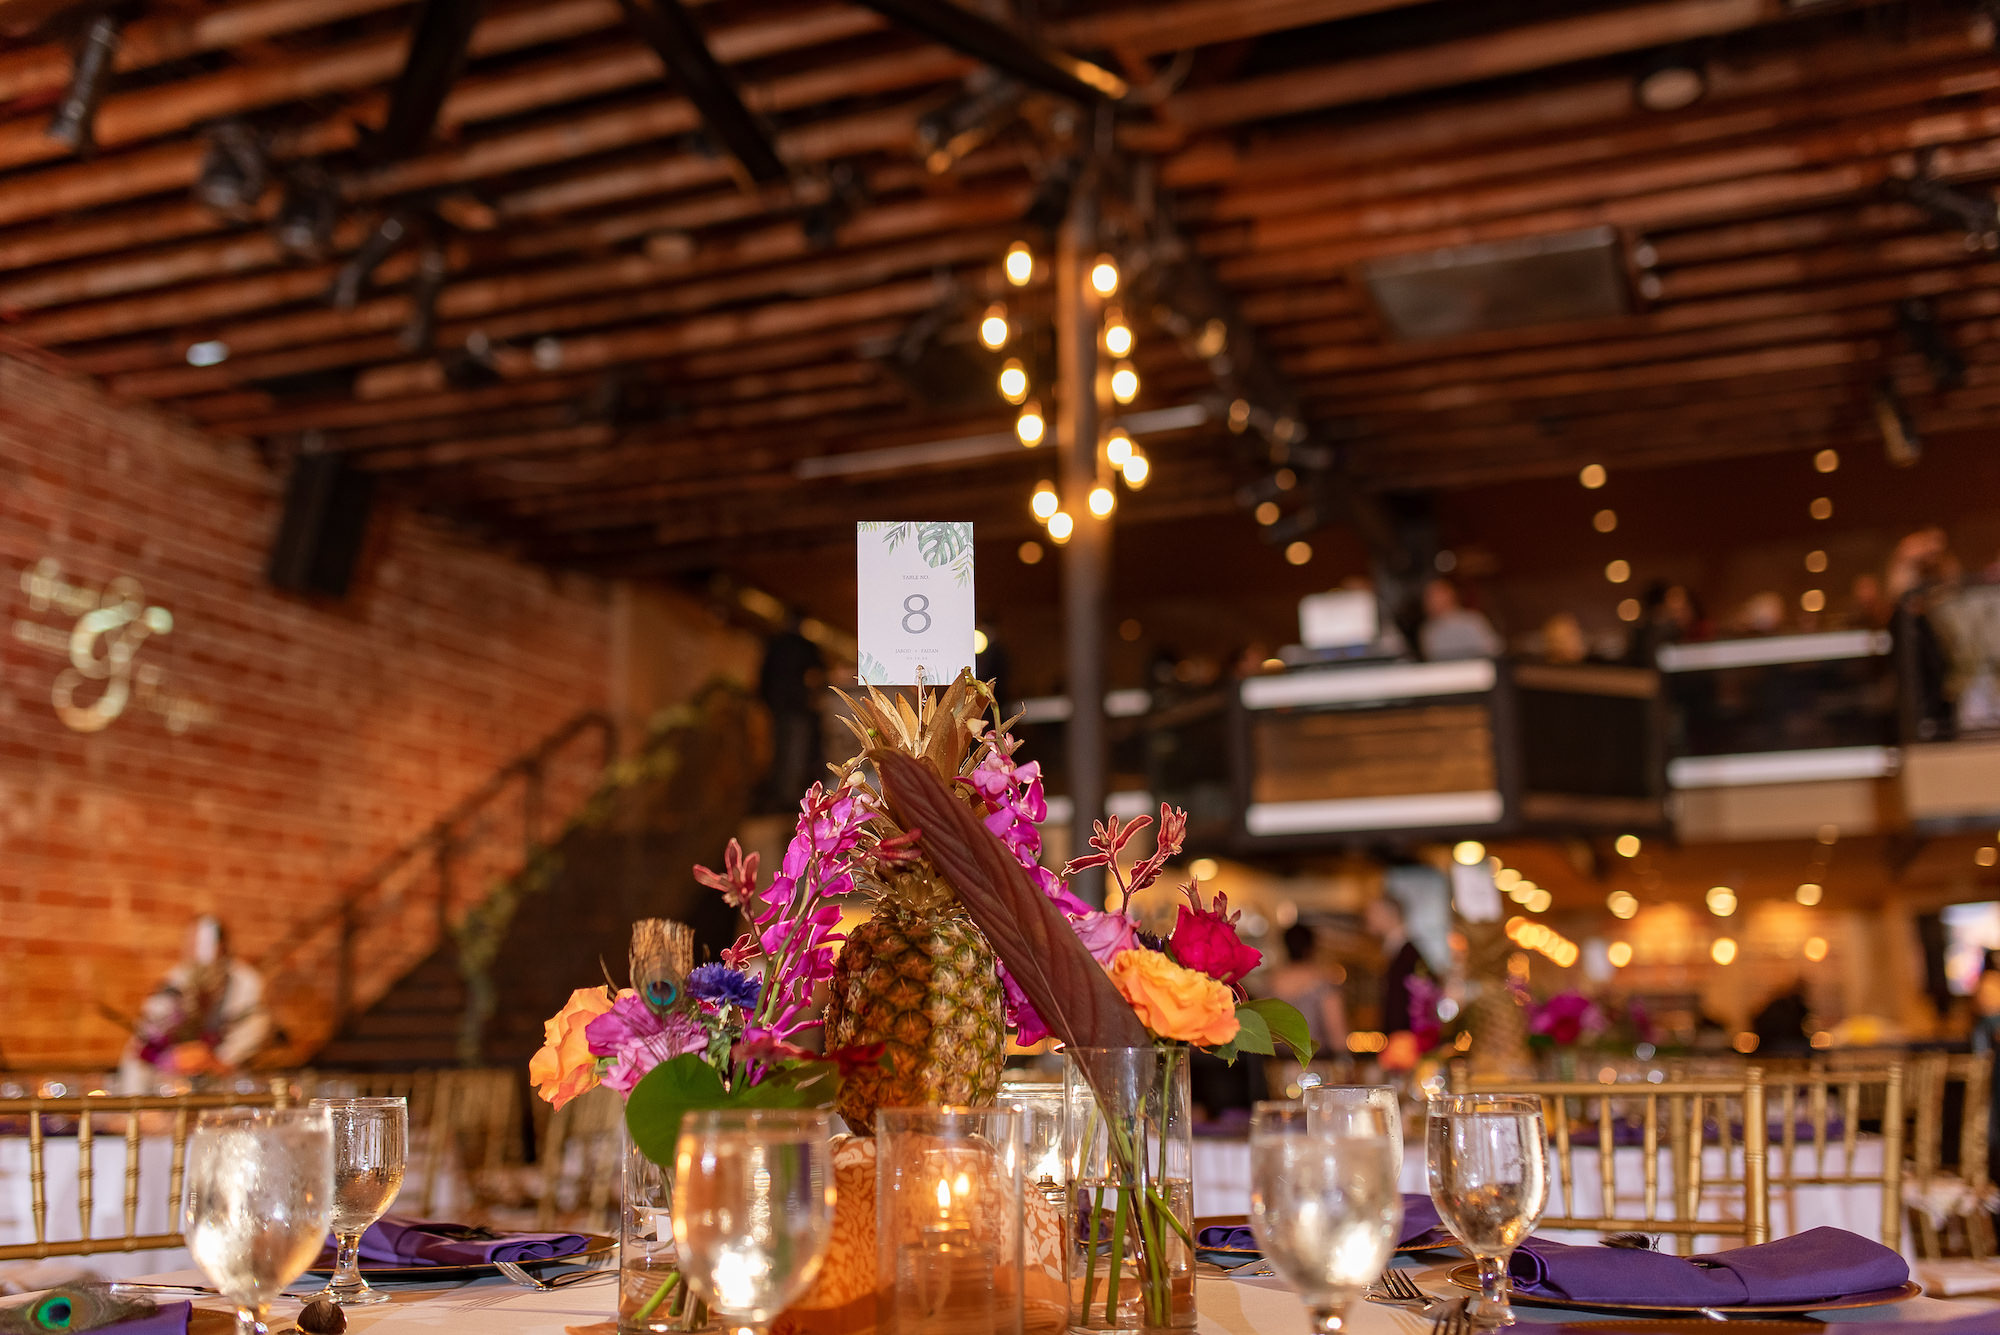 Industrial Indoor Wedding Reception White Linens and Gold Chairs with Tropical Inspired Details and Centerpieces | St. Pete Wedding Venue Nova 535